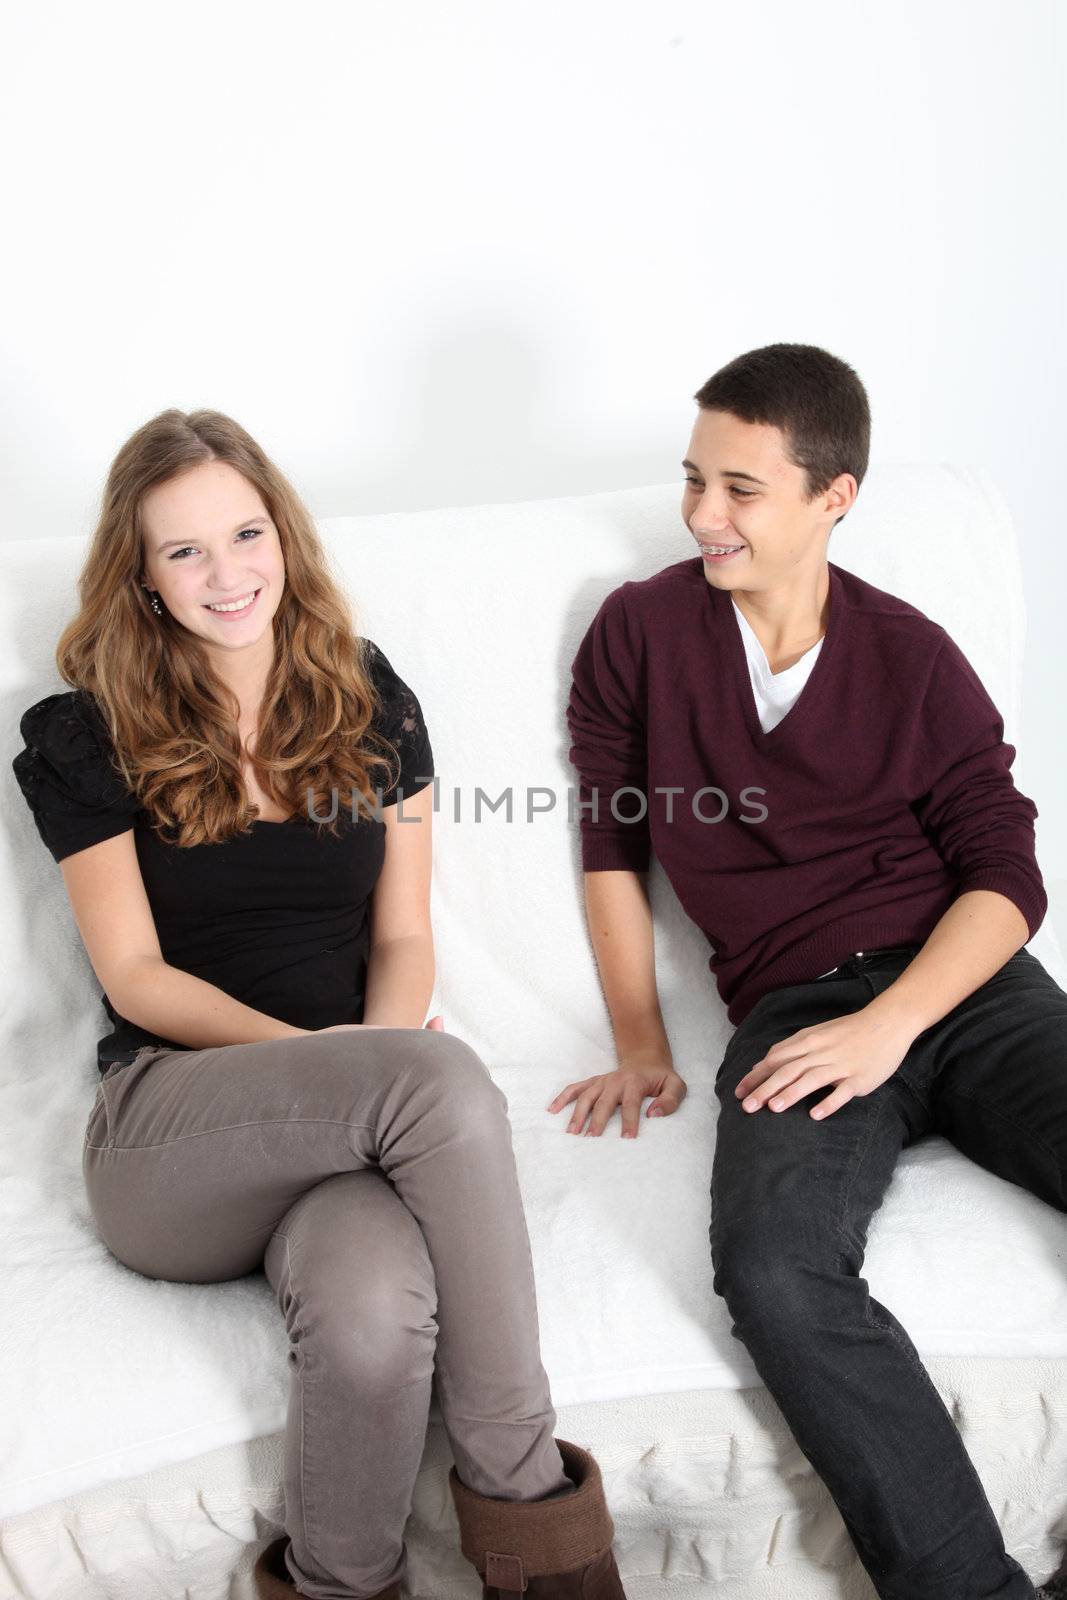 Attractive trendy young teenage brother and sister relaxing at home sitting enjoying themselves on a couch